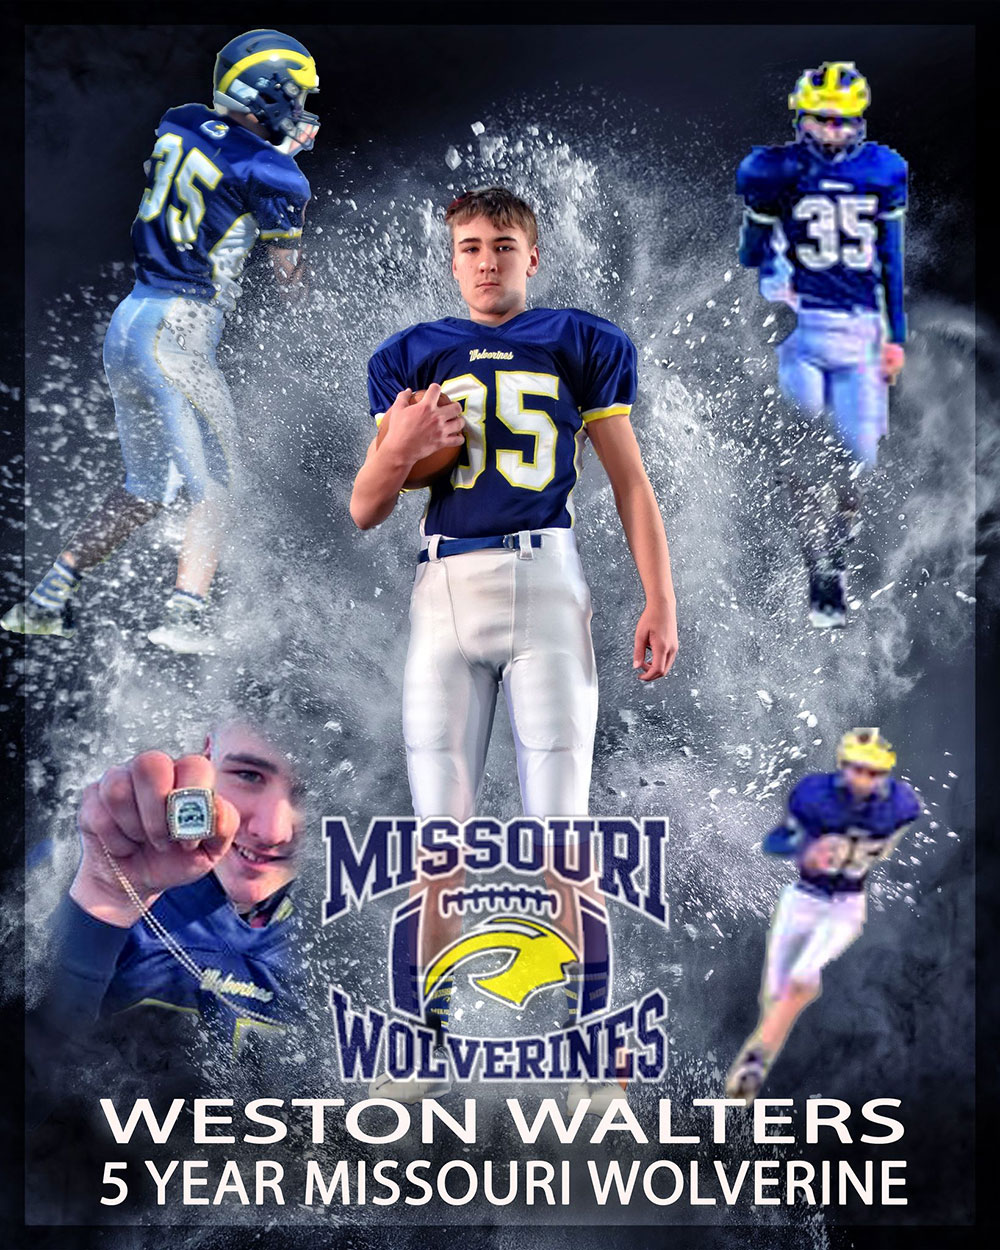  Walters Missouri Wolverines Loyalty Award Winner for participating 5 with the Missouri Wolverines Youth Football Club in Kansas City Missouri